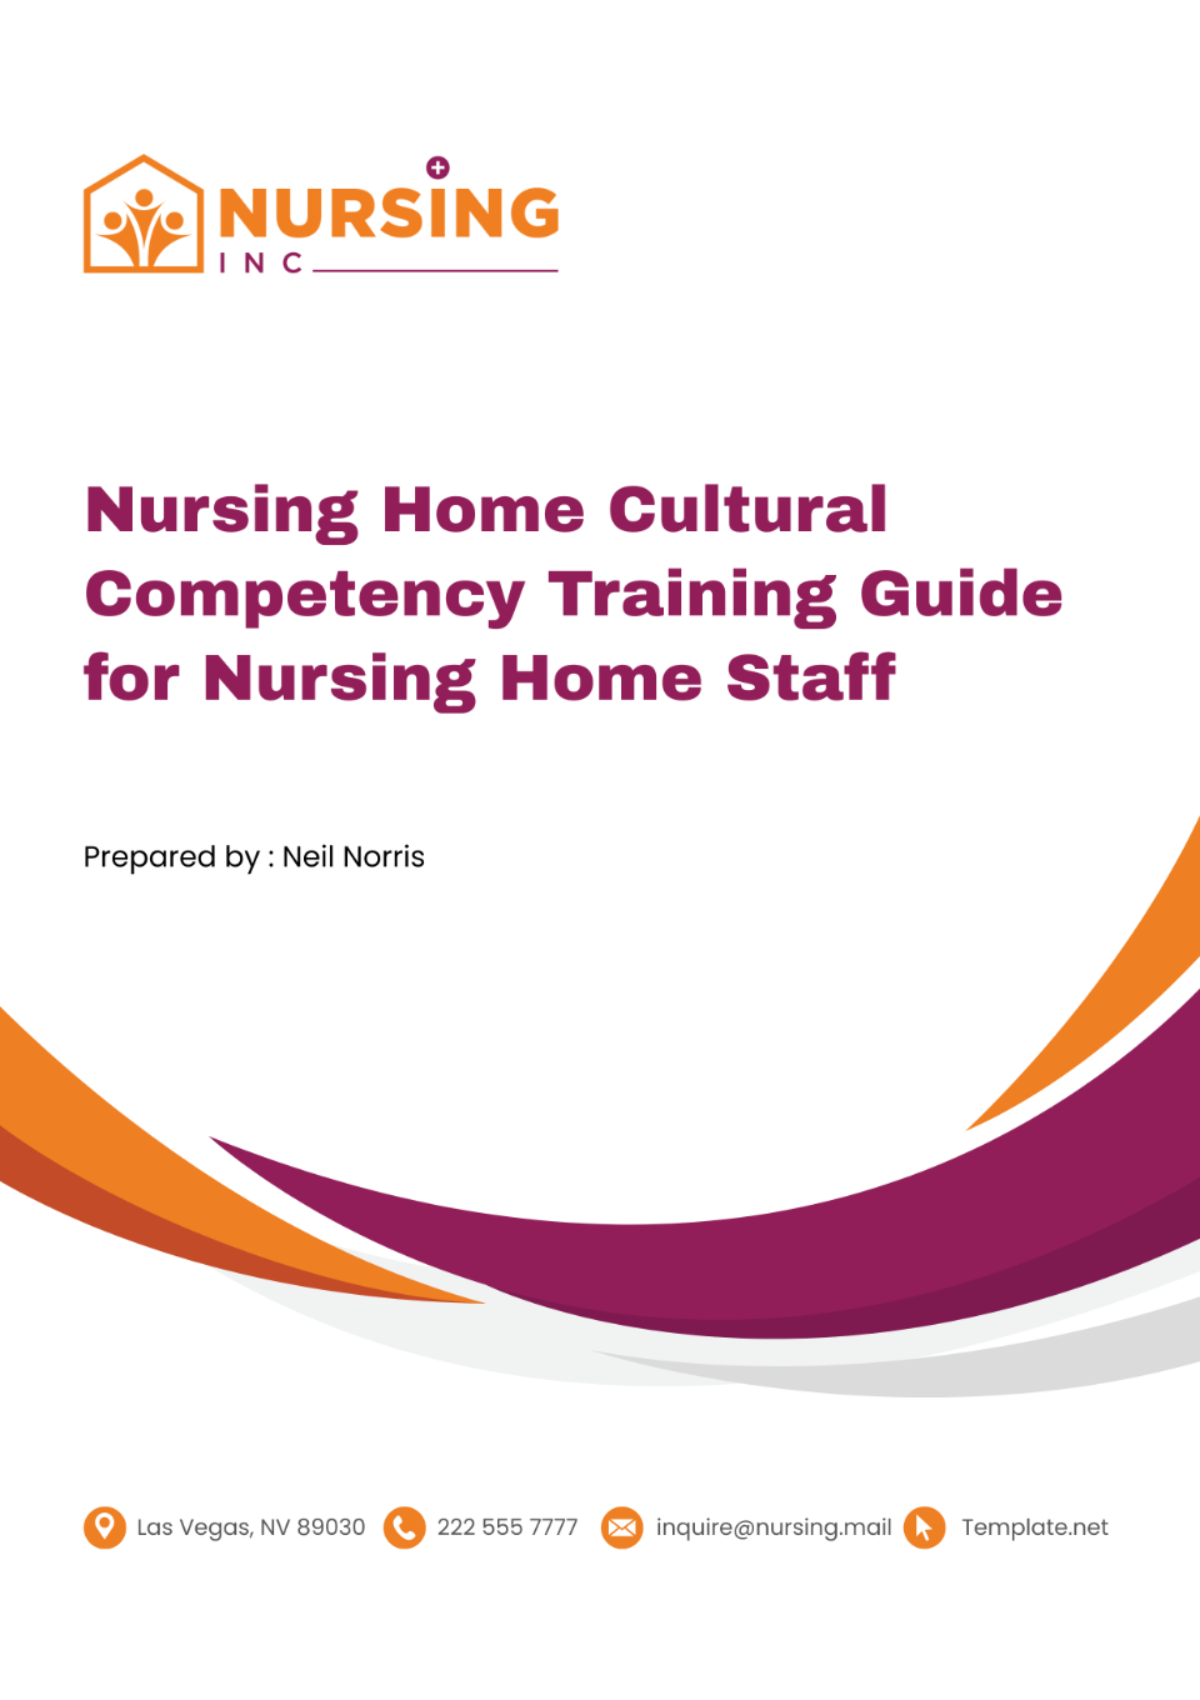 Nursing Home Cultural Competency Training Guide for Nursing Home Staff Template